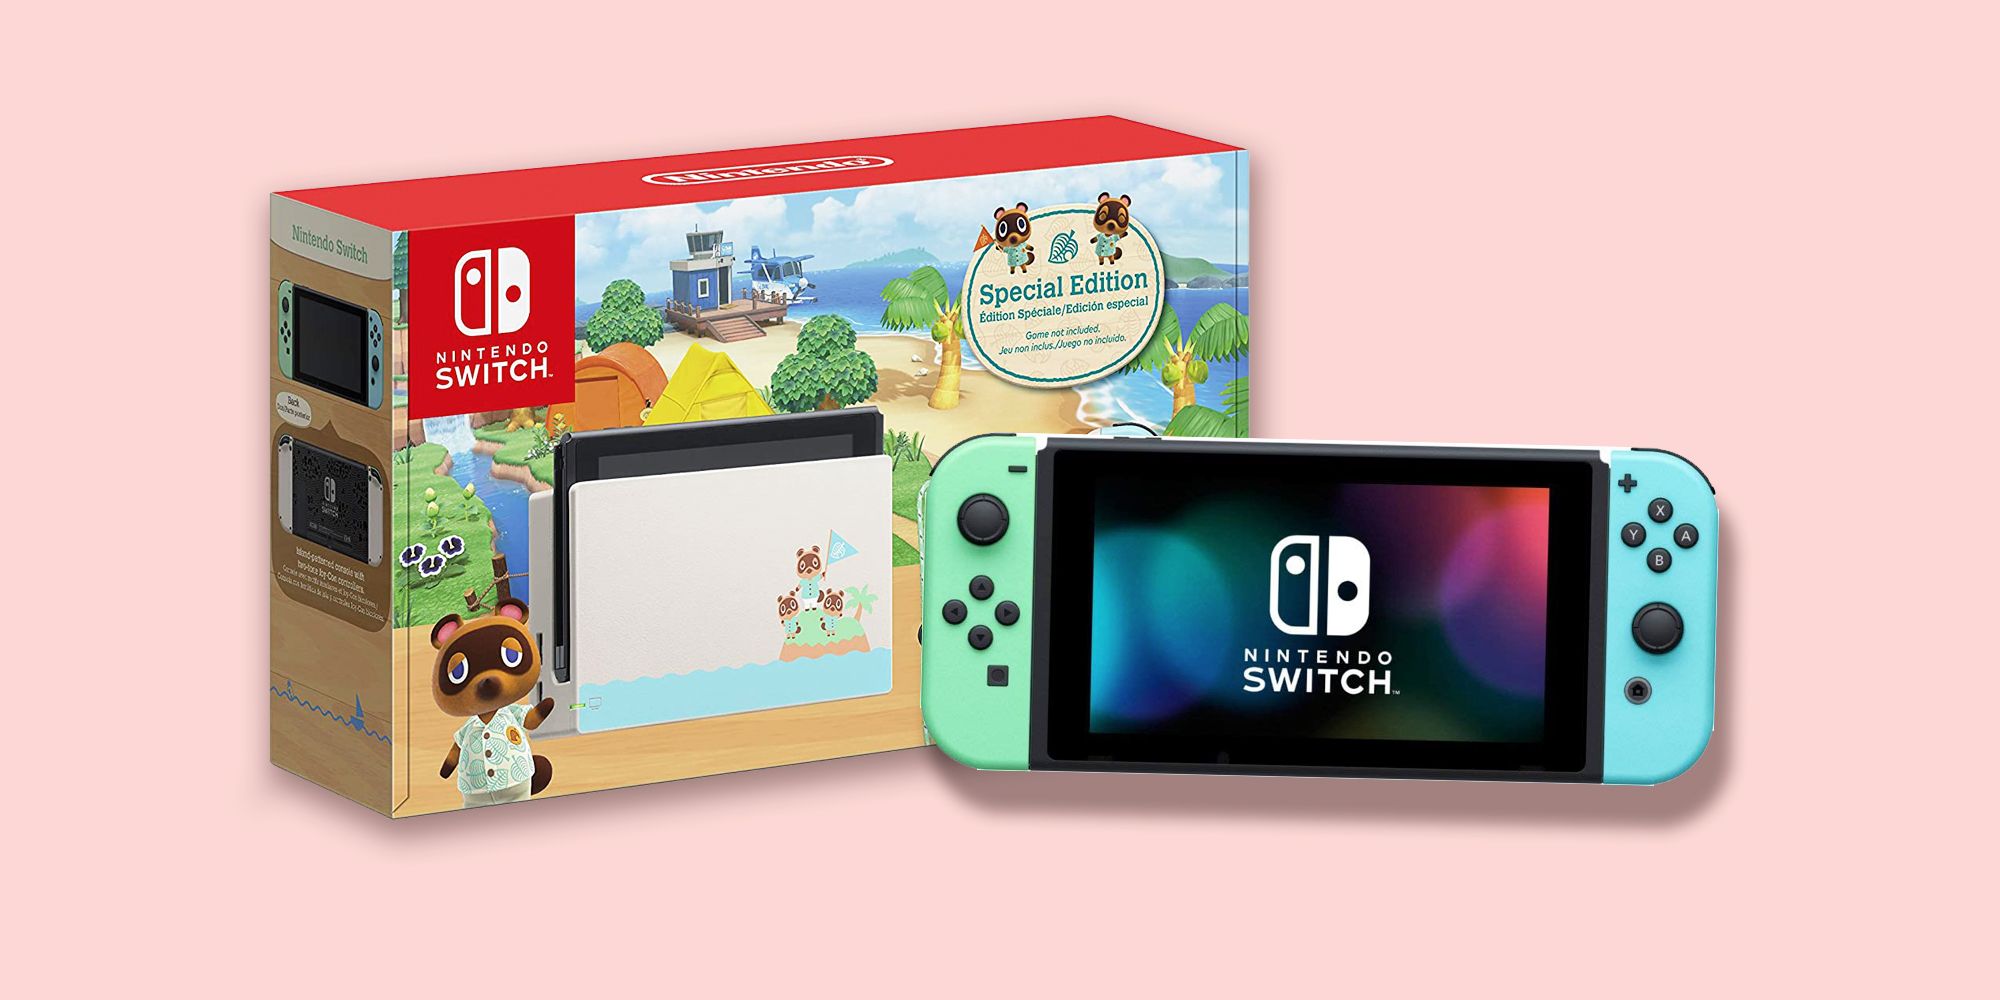 will there be more nintendo switch animal crossing consoles